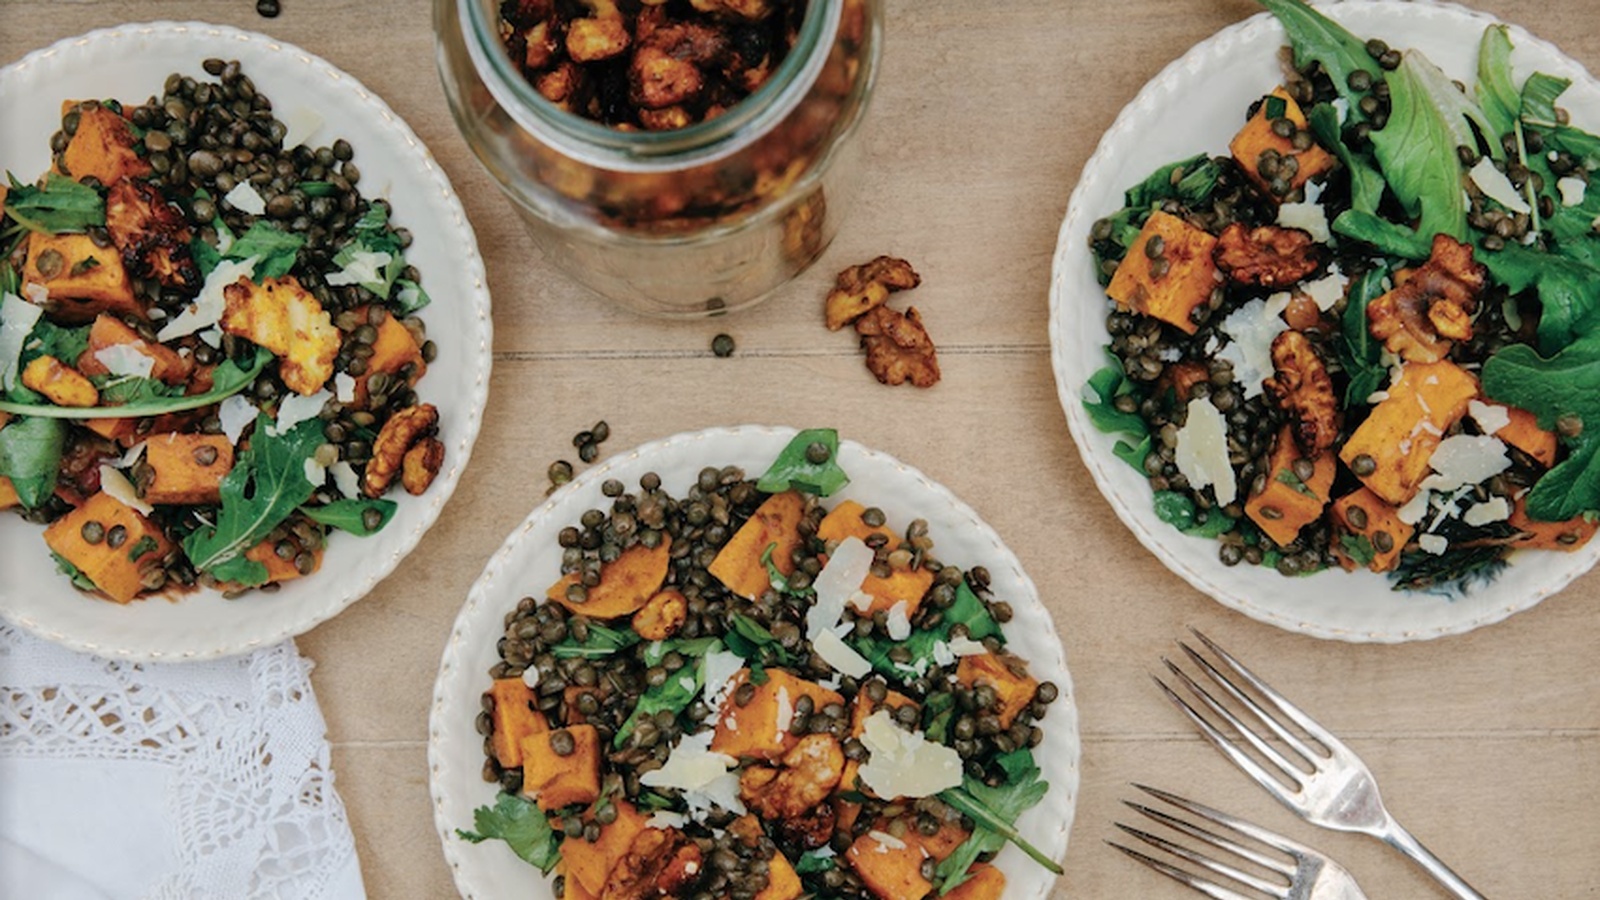 Spiced Sweet Potato, Puy Lentils, and Rocket with Honey-Roasted Walnuts